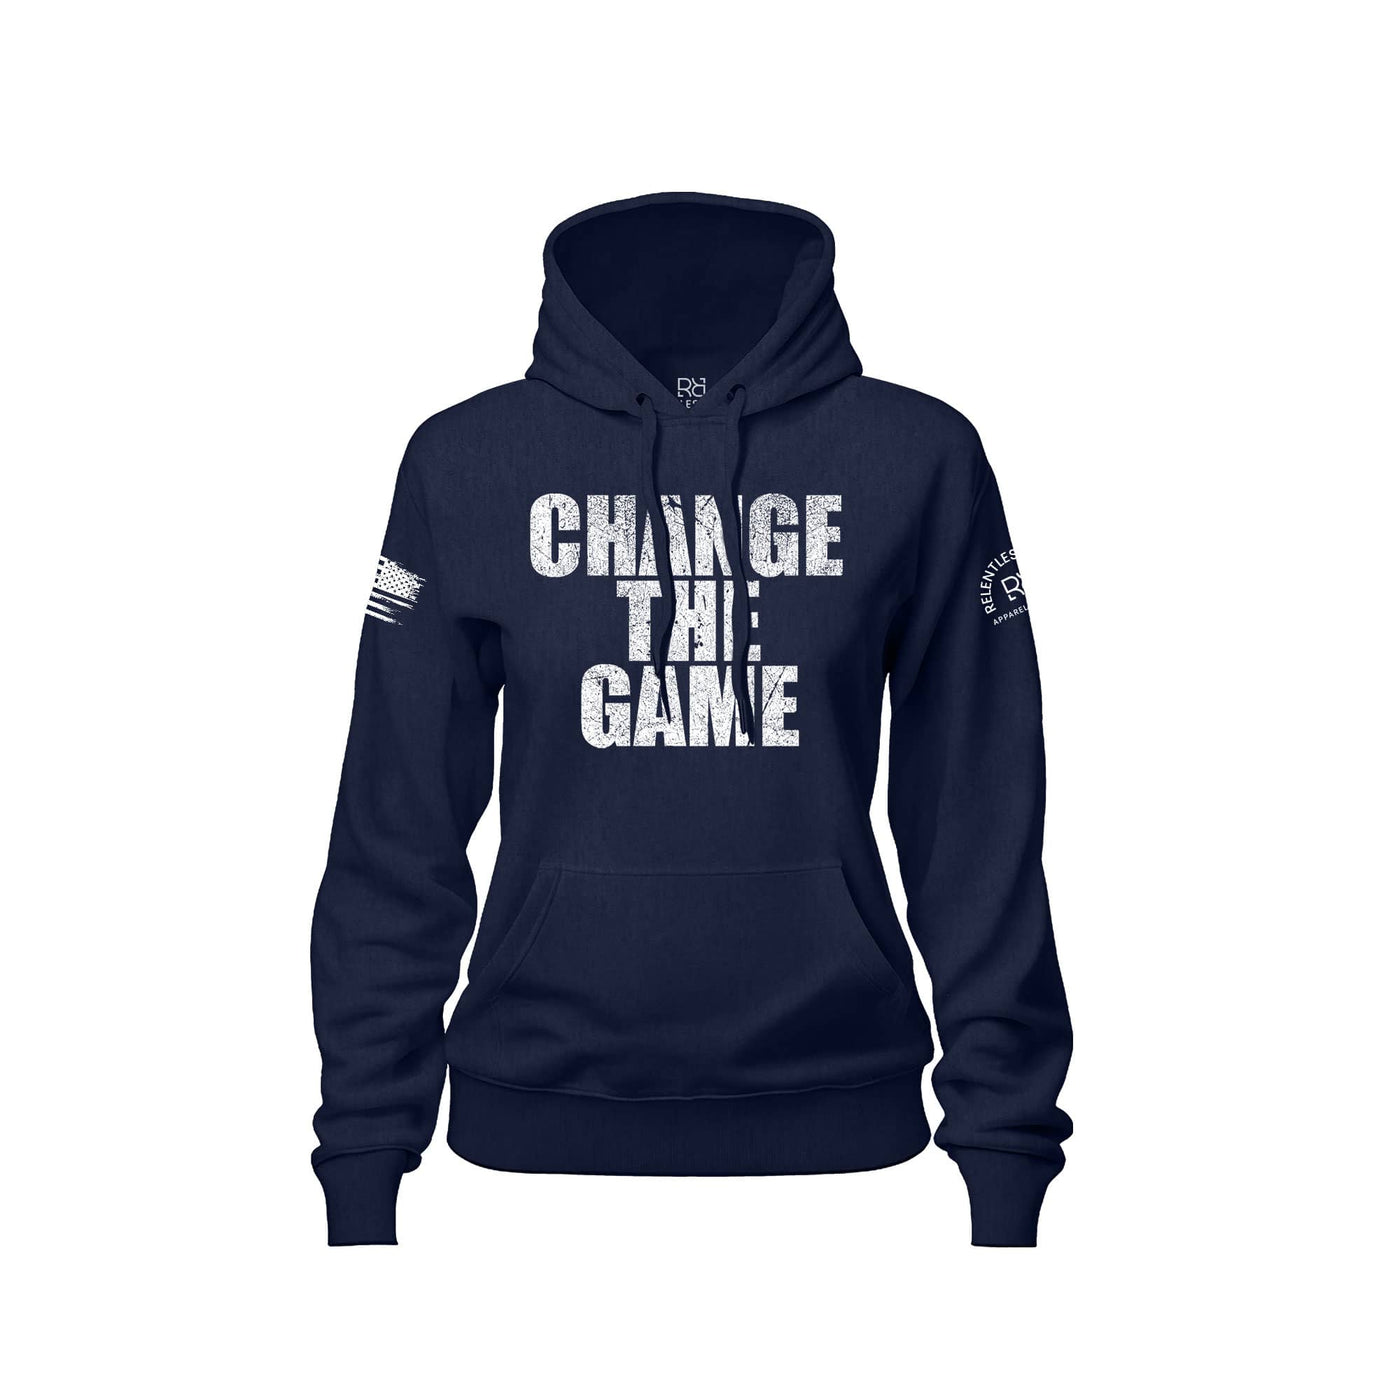 Change The Game | Front | Women's Hoodie